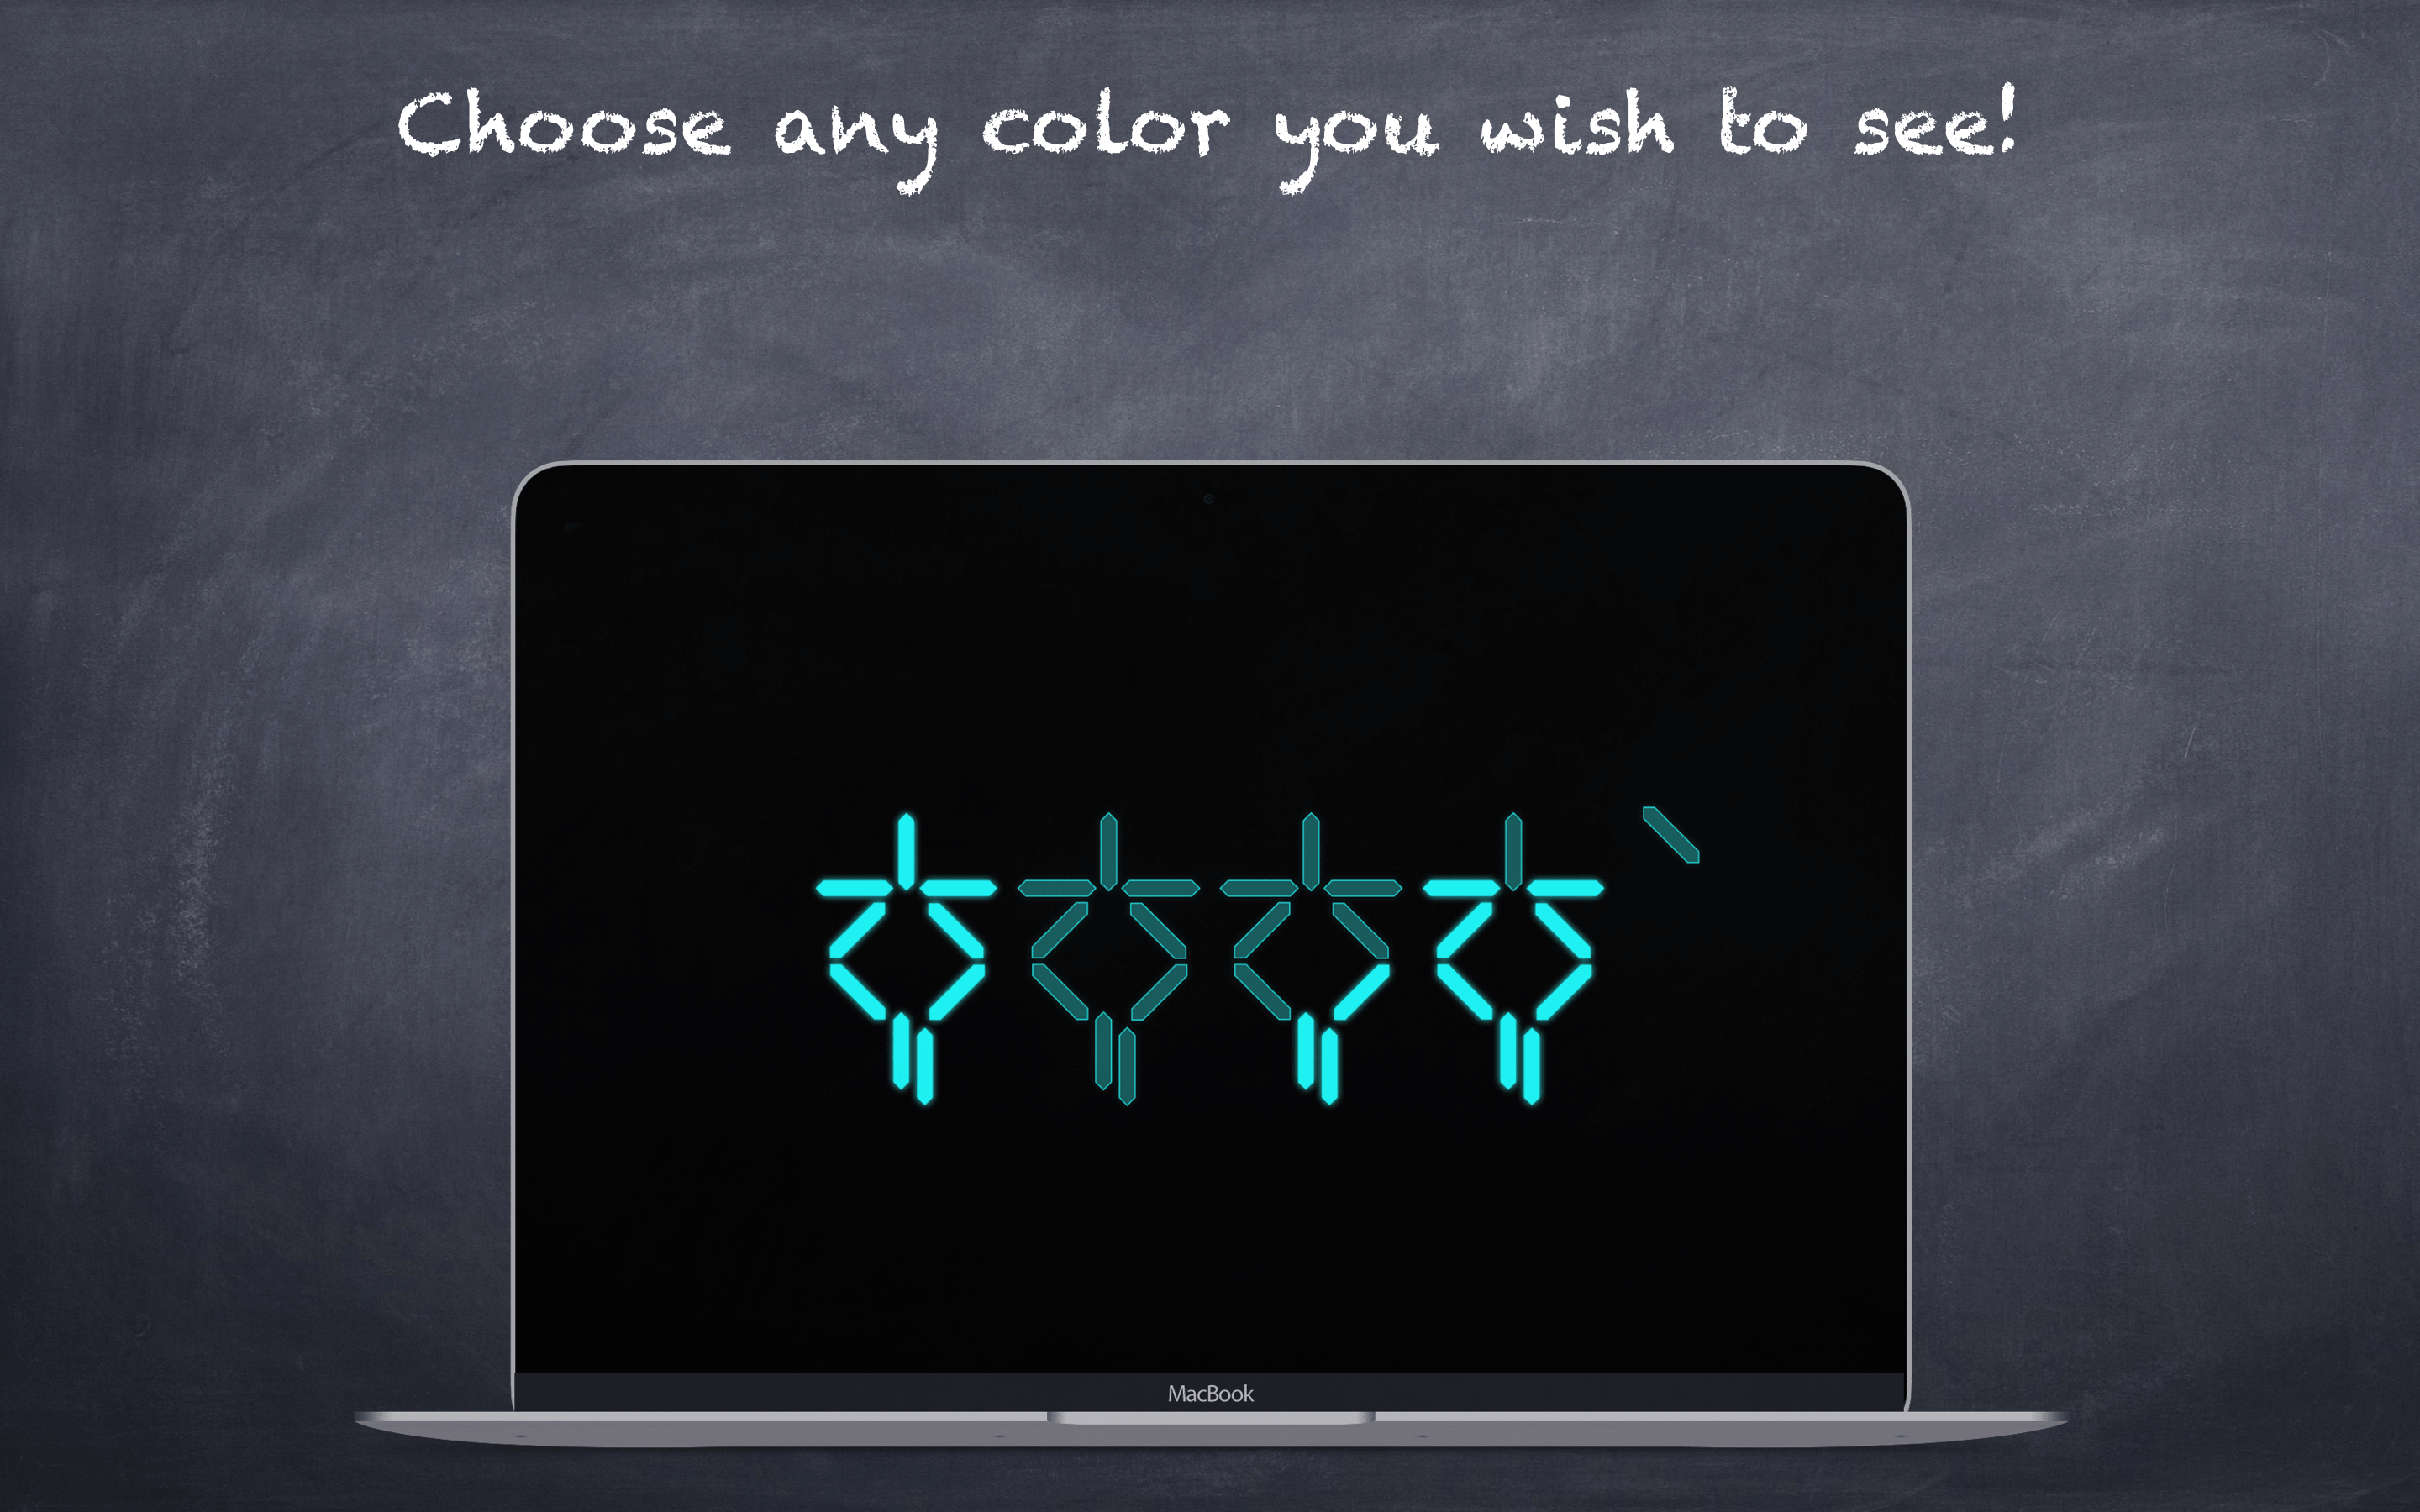 Predator - Choose any color you wish to see!